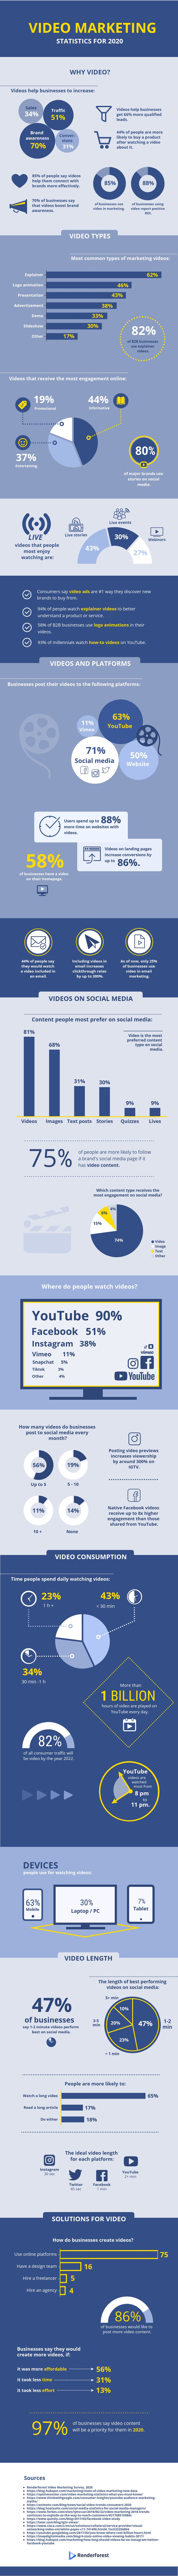 Infographic with video marketing stats of 2020.